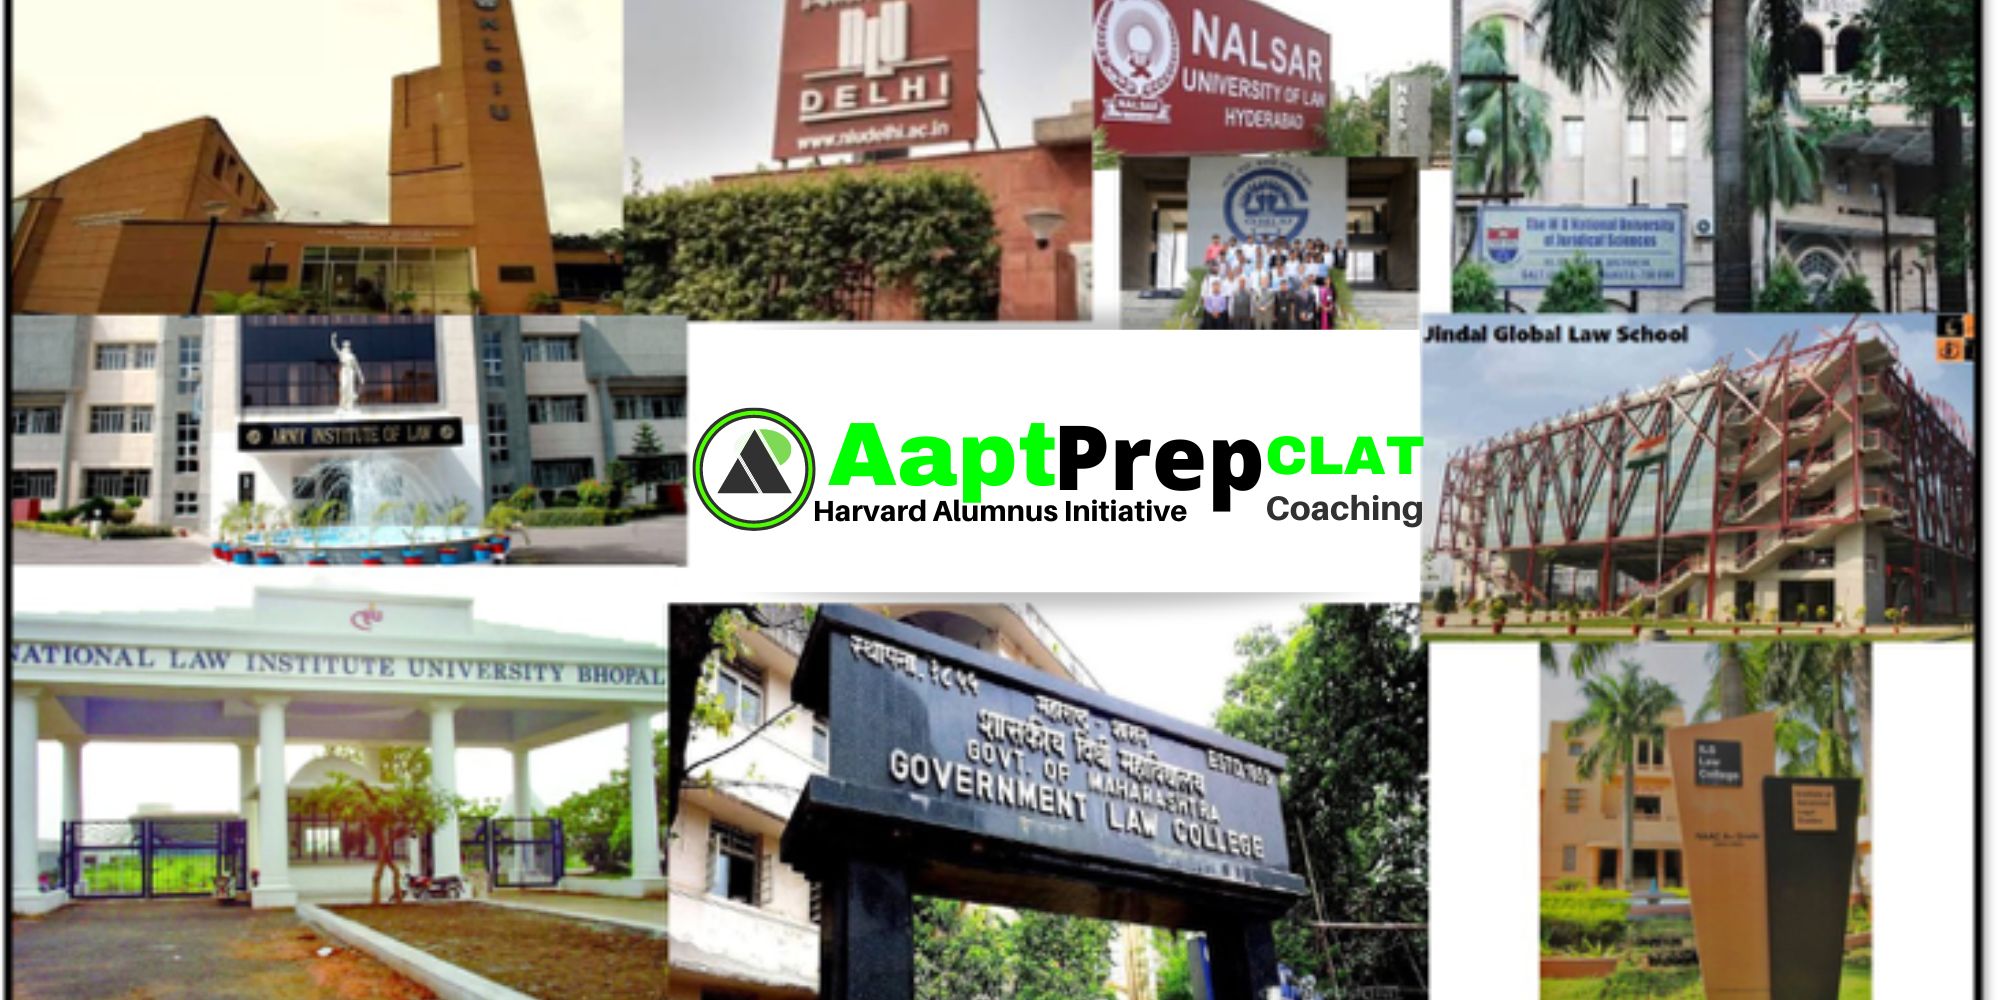 AaptPrep CLAT Coaching : Best Classroom & Online CLAT Coaching for CLAT 23 & CLAT 24.
500+ Daily CLAT Practice Tests.
300+ CLAT Sectional Tests.
27+ eBooks. 30 Mock CLATs, 10+ Mock AILET, 10+ Mocks for other Law entrance Exams.
Experienced faculty from Harvard,  NLU, GLC & IIM.
CLAT Coaching in Agartala
 
CLAT Coaching in Ahmedabad
 
CLAT Coaching in Allahabad
 
CLAT Coaching in Amravati
 
CLAT Coaching in Aurangabad
 
CLAT Coaching in Bangalore
 
CLAT Coaching in Bareilly
 
CLAT Coaching in Baroda
 
CLAT Coaching in Belgaum
 
CLAT Coaching in Berhampur
 
CLAT Coaching in Bhagalpur
 
CLAT Coaching in Bhilai
 
CLAT Coaching in Bhilwara
 
CLAT Coaching in Bhopal
 
CLAT Coaching in Bhubaneswar
 
CLAT Coaching in Bilaspur
 
CLAT Coaching in Chandigarh
 
CLAT Coaching in Chennai
 
CLAT Coaching in Chhindwara
 
CLAT Coaching in Cochin
 
CLAT Coaching in Coimbatore
 
CLAT Coaching in Cuttack
 
CLAT Coaching in Dehradun
 
CLAT Coaching in Delhi
 
CLAT Coaching in Dharwad
 
CLAT Coaching in Erode
 
CLAT Coaching in Gandhinagar
 
CLAT Coaching in Gorakhpur
 
CLAT Coaching in Greater Noida
 
CLAT Coaching in Guntur
 
CLAT Coaching in Gurgaon
 
CLAT Coaching in Guwahati
 
CLAT Coaching in Gwalior
 
CLAT Coaching in Haldwani
 
CLAT Coaching in Hisar
 
CLAT Coaching in Hubli
 
CLAT Coaching in Hyderabad
 
CLAT Coaching in Indore
 
CLAT Coaching in Jabalpur
 
CLAT Coaching in Jaipur
 
CLAT Coaching in Jalandhar
 
CLAT Coaching in Jalgaon
 
CLAT Coaching in Jammu
 
CLAT Coaching in Jamshedpur
 
CLAT Coaching in Jodhpur
 
CLAT Coaching in Kakinada
 
CLAT Coaching in Kannur
 
CLAT Coaching in Kanpur
 
CLAT Coaching in Karur
 
CLAT Coaching in Kolhapur
 
CLAT Coaching in Kolkata
 
CLAT Coaching in Kollam
 
CLAT Coaching in Kota
 
CLAT Coaching in Kozhikode
 
CLAT Coaching in Lucknow
 
CLAT Coaching in Madurai
 
CLAT Coaching in Mangalore
 
CLAT Coaching in Meerut
 
CLAT Coaching in Moradabad
 
CLAT Coaching in Mumbai
 
CLAT Coaching in Muvattupuzha
 
CLAT Coaching in Mysore
 
CLAT Coaching in Nagpur
 
CLAT Coaching in Nashik
 
CLAT Coaching in Ongole
 
CLAT Coaching in Panipat
 
CLAT Coaching in Patna
 
CLAT Coaching in Pondicherry
 
CLAT Coaching in Prayagraj
 
CLAT Coaching in Pune
 
CLAT Coaching in Raipur
 
CLAT Coaching in Rajahmundry
 
CLAT Coaching in Ranchi
 
CLAT Coaching in Rohtak
 
CLAT Coaching in Rourkela
 
CLAT Coaching in Sambalpur
 
CLAT Coaching in Solapur
 
CLAT Coaching in Surat
 
CLAT Coaching in Trichur
 
CLAT Coaching in Trichy
 
CLAT Coaching in Trivandrum
 
CLAT Coaching in Udaipur
 
CLAT Coaching in Udupi
 
CLAT Coaching in Varanasi
 
CLAT Coaching in Vijayawada
 
CLAT Coaching in Vizag
 
CLAT Coaching in Warangal
CLAT 2023 Exam
CLAT 2023 Latest Update
CLAT 2023 Notification
CLAT 2023 Exam Summary
CLAT 2023 Exam Date 
CLAT 2023 Application Form 
CLAT 2023 Application Fee
CLAT 2023 Eligibility Criteria
CLAT 2023 Exam Pattern
CLAT 2023 Syllabus
CLAT Colleges
CLAT 2023 Exam Centers
CLAT 2023 Admit Card 
CLAT 2023 Answer Key 
CLAT 2023 Result
CLAT 2023 Cut Off
CLAT 2023 Counselling
CLAT 2024 Exam
CLAT 2024 Latest Update
CLAT 2024 Notification
CLAT 2024 Exam Summary
CLAT 2024 Exam Date 
CLAT 2024 Application Form 
CLAT 2024 Application Fee
CLAT 2024 Eligibility Criteria
CLAT 2024 Exam Pattern
CLAT 2024 Syllabus
CLAT Colleges
CLAT 2024 Exam Centers
CLAT 2024 Admit Card 
CLAT 2024 Answer Key 
CLAT 2024 Result
CLAT 2024 Cut Off
CLAT 2024 Counselling
CLAT 2022 Exam
CLAT 2022 Latest Update
CLAT 2022 Notification
CLAT 2022 Exam Summary
CLAT 2022 Exam Date 
CLAT 2022 Application Form 
CLAT 2022 Application Fee
CLAT 2022 Eligibility Criteria
CLAT 2022 Exam Pattern
CLAT 2022 Syllabus
CLAT Colleges
CLAT 2022 Exam Centers
CLAT 2022 Admit Card 
CLAT 2022 Answer Key 
CLAT 2022 Result
CLAT 2022 Cut Off
CLAT 2022 Counselling
CLAT 2023 Exam
CLAT 2023 Latest Update
CLAT 2023 Notification
CLAT 2023 Exam Summary
CLAT 2023 Exam Date 
CLAT 2023 Application Form 
CLAT 2023 Application Fee
CLAT 2023 Eligibility Criteria
CLAT 2023 Exam Pattern
CLAT 2023 Syllabus
CLAT Colleges
CLAT 2023 Exam Centers
CLAT 2023 Admit Card 
CLAT 2023 Answer Key 
CLAT 2023 Result
CLAT 2023 Cut Off
CLAT 2023 Counselling
CLAT 2024 Exam
CLAT 2024 Latest Update
CLAT 2024 Notification
CLAT 2024 Exam Summary
CLAT 2024 Exam Date 
CLAT 2024 Application Form 
CLAT 2024 Application Fee
CLAT 2024 Eligibility Criteria
CLAT 2024 Exam Pattern
CLAT 2024 Syllabus
CLAT Colleges
CLAT 2024 Exam Centers
CLAT 2024 Admit Card 
CLAT 2024 Answer Key 
CLAT 2024 Result
CLAT 2024 Cut Off
CLAT 2024 Counselling
CLAT 2022 Exam
CLAT 2022 Latest Update
CLAT 2022 Notification
CLAT 2022 Exam Summary
CLAT 2022 Exam Date 
CLAT 2022 Application Form 
CLAT 2022 Application Fee
CLAT 2022 Eligibility Criteria
CLAT 2022 Exam Pattern
CLAT 2022 Syllabus
CLAT Colleges
CLAT 2022 Exam Centers
CLAT 2022 Admit Card 
CLAT 2022 Answer Key 
CLAT 2022 Result
CLAT 2022 Cut Off
CLAT 2022 Counselling
CLAT 2023 Exam
CLAT 2023 Latest Update
CLAT 2023 Notification
CLAT 2023 Exam Summary
CLAT 2023 Exam Date 
CLAT 2023 Application Form 
CLAT 2023 Application Fee
CLAT 2023 Eligibility Criteria
CLAT 2023 Exam Pattern
CLAT 2023 Syllabus
CLAT Colleges
CLAT 2023 Exam Centers
CLAT 2023 Admit Card 
CLAT 2023 Answer Key 
CLAT 2023 Result
CLAT 2023 Cut Off
CLAT 2023 Counselling
CLAT 2024 Exam
CLAT 2024 Latest Update
CLAT 2024 Notification
CLAT 2024 Exam Summary
CLAT 2024 Exam Date 
CLAT 2024 Application Form 
CLAT 2024 Application Fee
CLAT 2024 Eligibility Criteria
CLAT 2024 Exam Pattern
CLAT 2024 Syllabus
CLAT Colleges
CLAT 2024 Exam Centers
CLAT 2024 Admit Card 
CLAT 2024 Answer Key 
CLAT 2024 Result
CLAT 2024 Cut Off
CLAT 2024 Counselling
CLAT 2022 Exam
CLAT 2022 Latest Update
CLAT 2022 Notification
CLAT 2022 Exam Summary
CLAT 2022 Exam Date 
CLAT 2022 Application Form 
CLAT 2022 Application Fee
CLAT 2022 Eligibility Criteria
CLAT 2022 Exam Pattern
CLAT 2022 Syllabus
CLAT Colleges
CLAT 2022 Exam Centers
CLAT 2022 Admit Card 
CLAT 2022 Answer Key 
CLAT 2022 Result
CLAT 2022 Cut Off
CLAT 2022 Counselling
CLAT 2023 Exam
CLAT 2023 Latest Update
CLAT 2023 Notification
CLAT 2023 Exam Summary
CLAT 2023 Exam Date 
CLAT 2023 Application Form 
CLAT 2023 Application Fee
CLAT 2023 Eligibility Criteria
CLAT 2023 Exam Pattern
CLAT 2023 Syllabus
CLAT Colleges
CLAT 2023 Exam Centers
CLAT 2023 Admit Card 
CLAT 2023 Answer Key 
CLAT 2023 Result
CLAT 2023 Cut Off
CLAT 2023 Counselling
CLAT 2024 Exam
CLAT 2024 Latest Update
CLAT 2024 Notification
CLAT 2024 Exam Summary
CLAT 2024 Exam Date 
CLAT 2024 Application Form 
CLAT 2024 Application Fee
CLAT 2024 Eligibility Criteria
CLAT 2024 Exam Pattern
CLAT 2024 Syllabus
CLAT Colleges
CLAT 2024 Exam Centers
CLAT 2024 Admit Card 
CLAT 2024 Answer Key 
CLAT 2024 Result
CLAT 2024 Cut Off
CLAT 2024 Counselling
CLAT 2022 Exam
CLAT 2022 Latest Update
CLAT 2022 Notification
CLAT 2022 Exam Summary
CLAT 2022 Exam Date 
CLAT 2022 Application Form 
CLAT 2022 Application Fee
CLAT 2022 Eligibility Criteria
CLAT 2022 Exam Pattern
CLAT 2022 Syllabus
CLAT Colleges
CLAT 2022 Exam Centers
CLAT 2022 Admit Card 
CLAT 2022 Answer Key 
CLAT 2022 Result
CLAT 2022 Cut Off
CLAT 2022 Counselling
